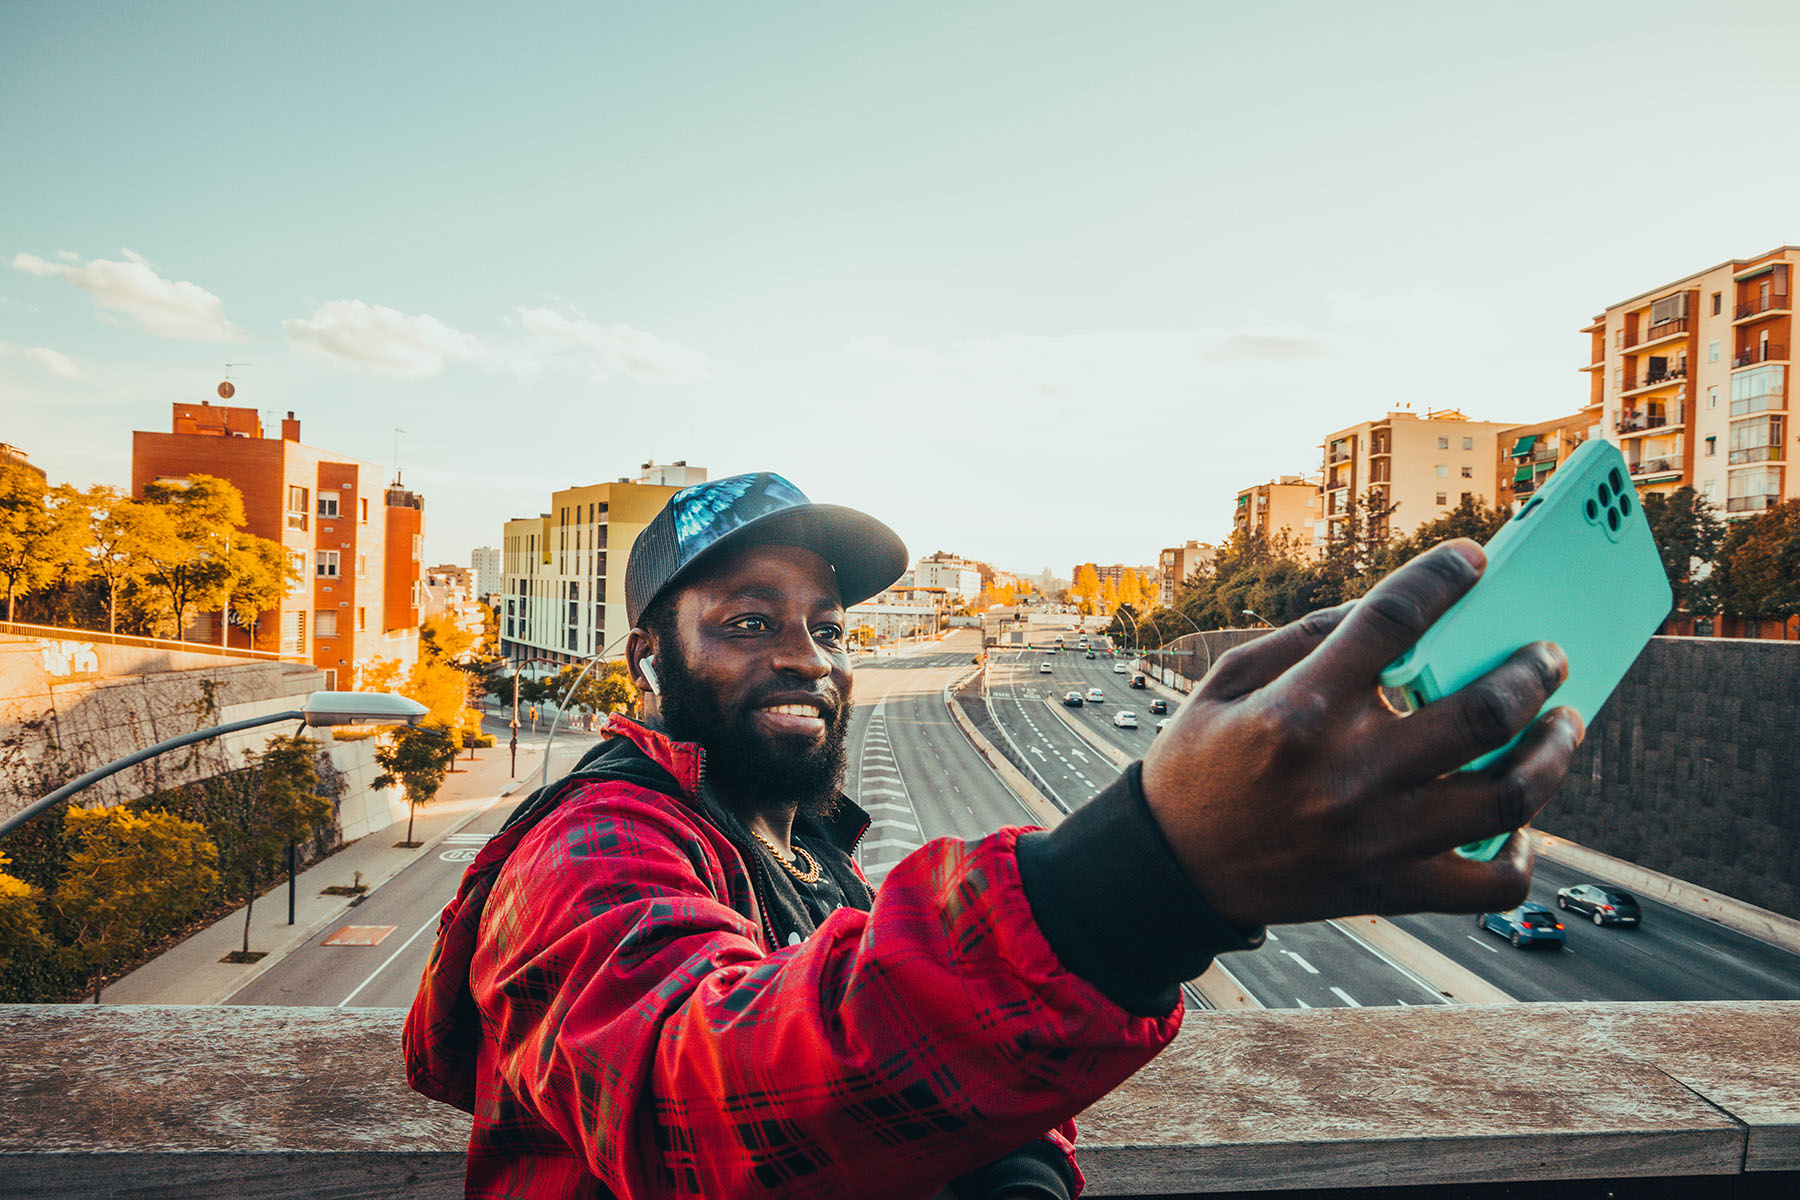 Real people portrait in the streets of Barcelona city, taking selfie picture above the highway with the Barcelona city skyline in the background.